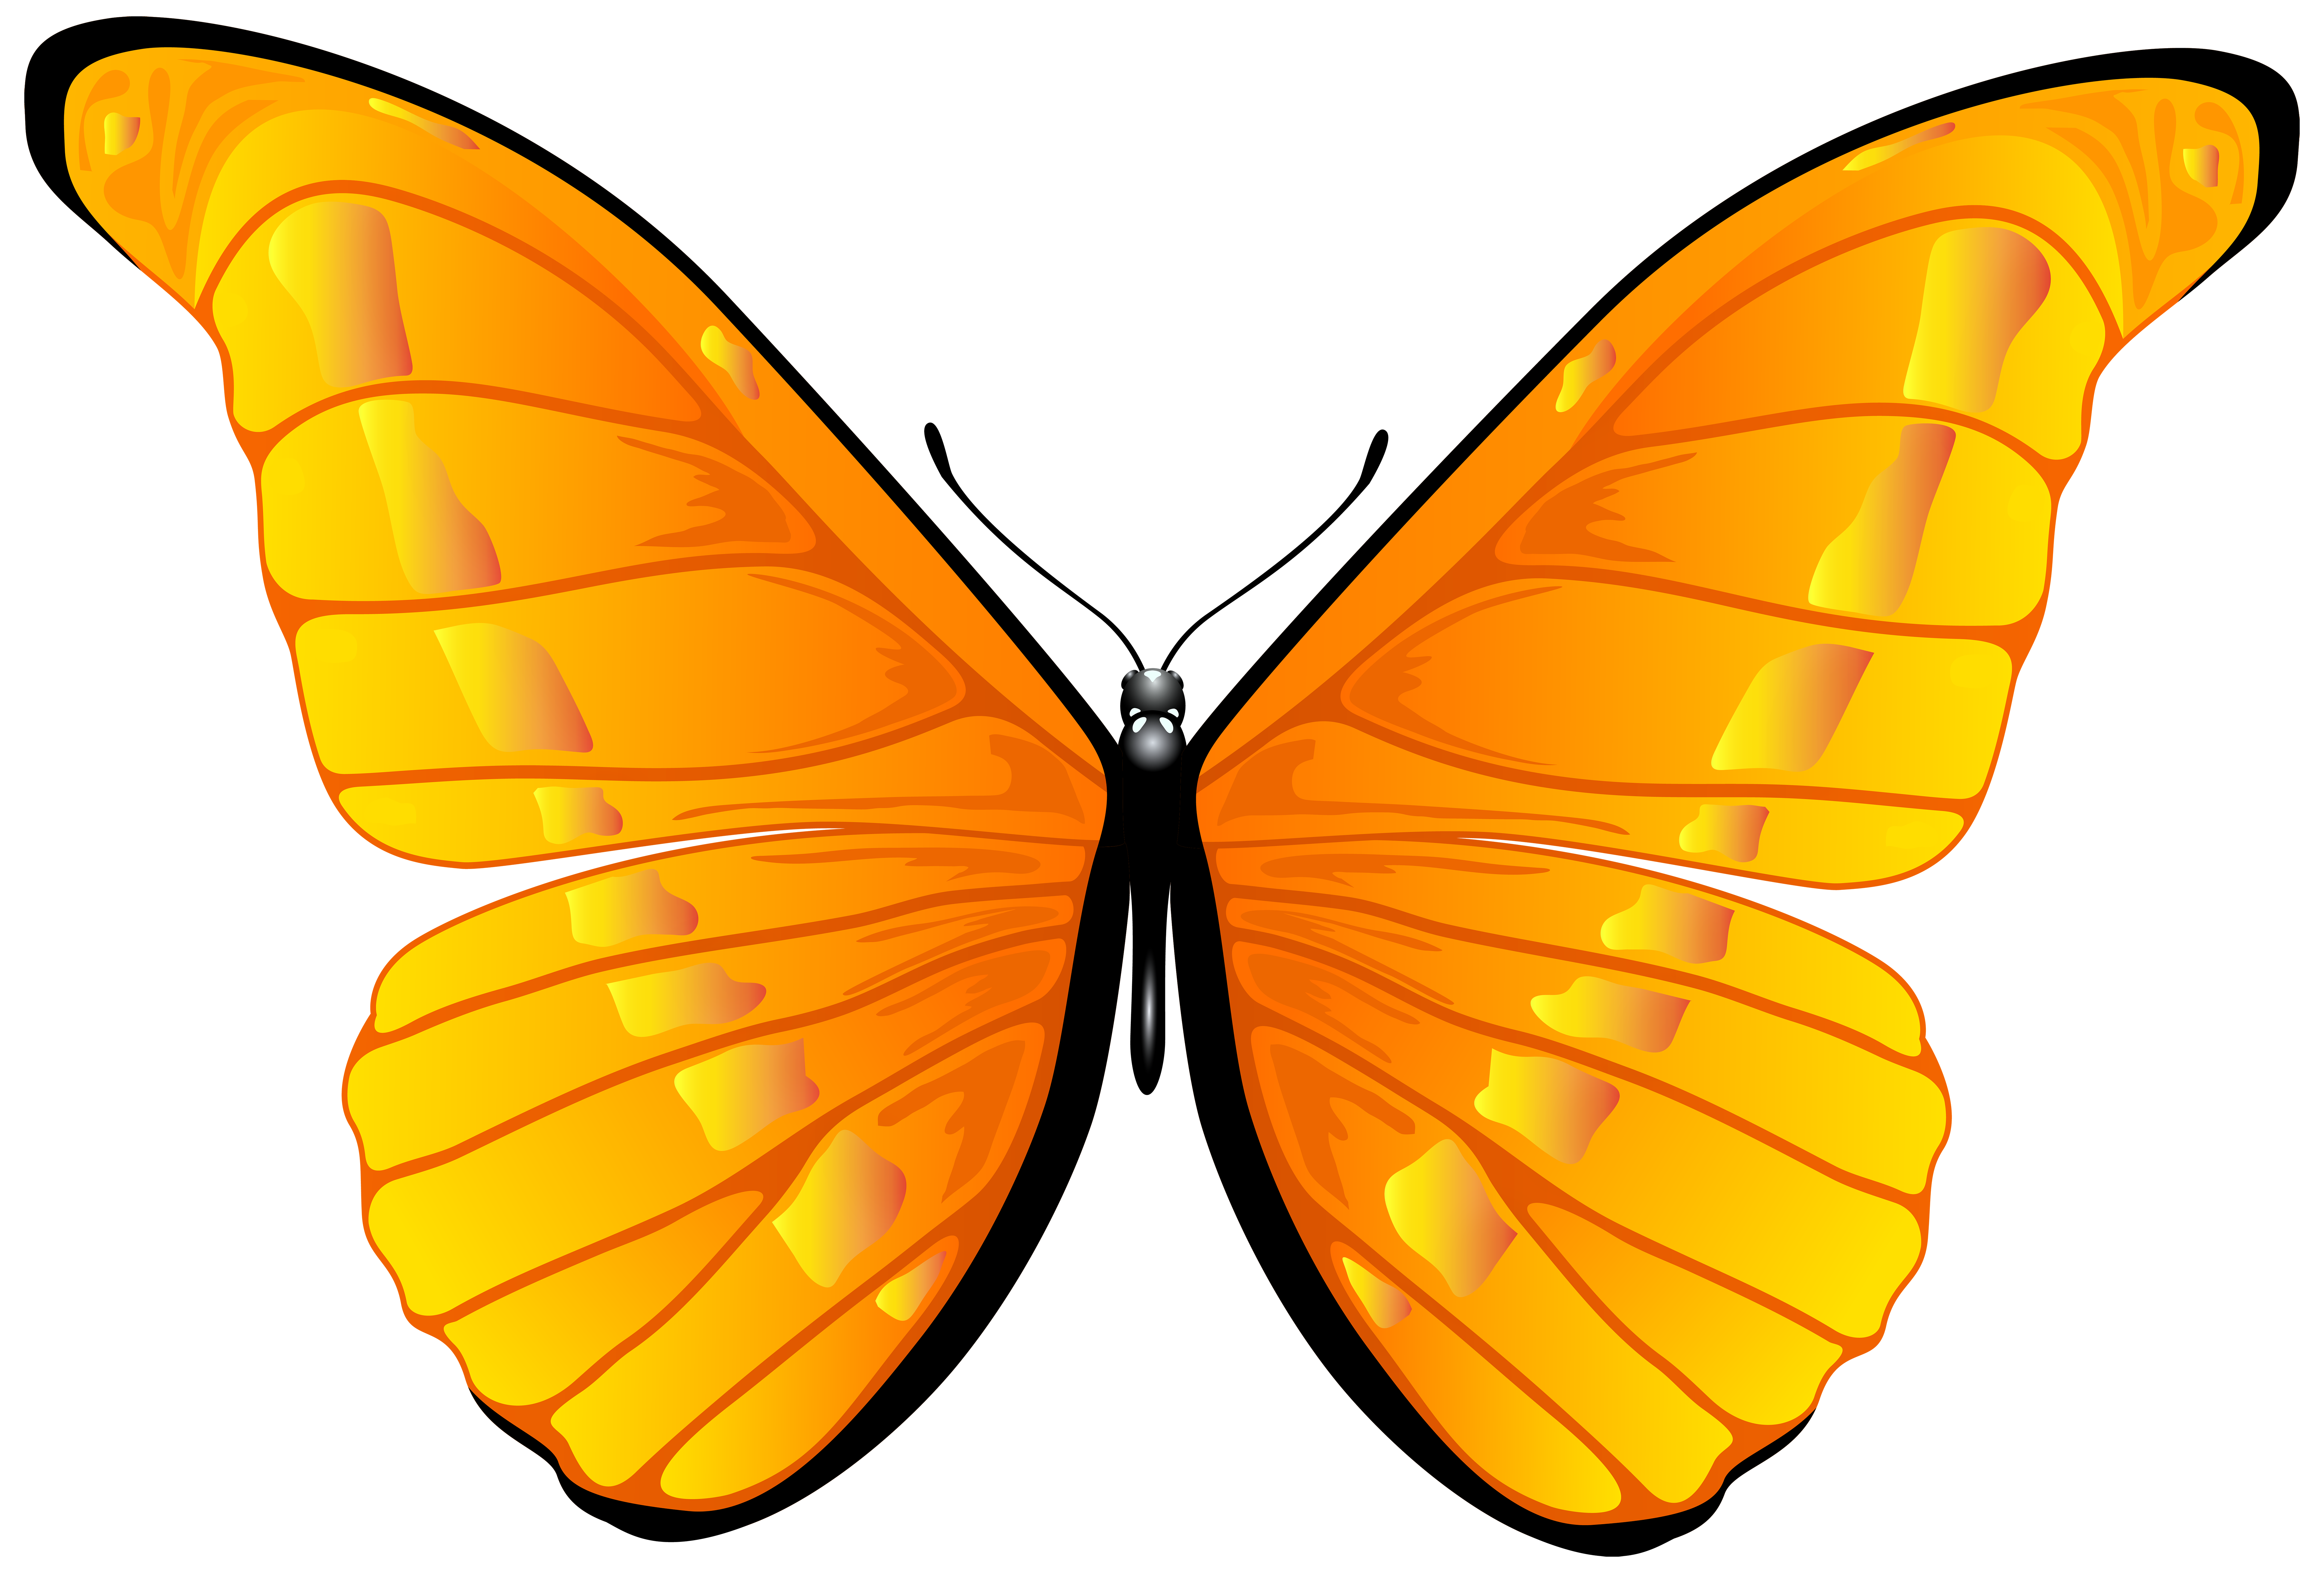 Orange Butterfly PNG Clip Art Image | Gallery Yopriceville - High ...